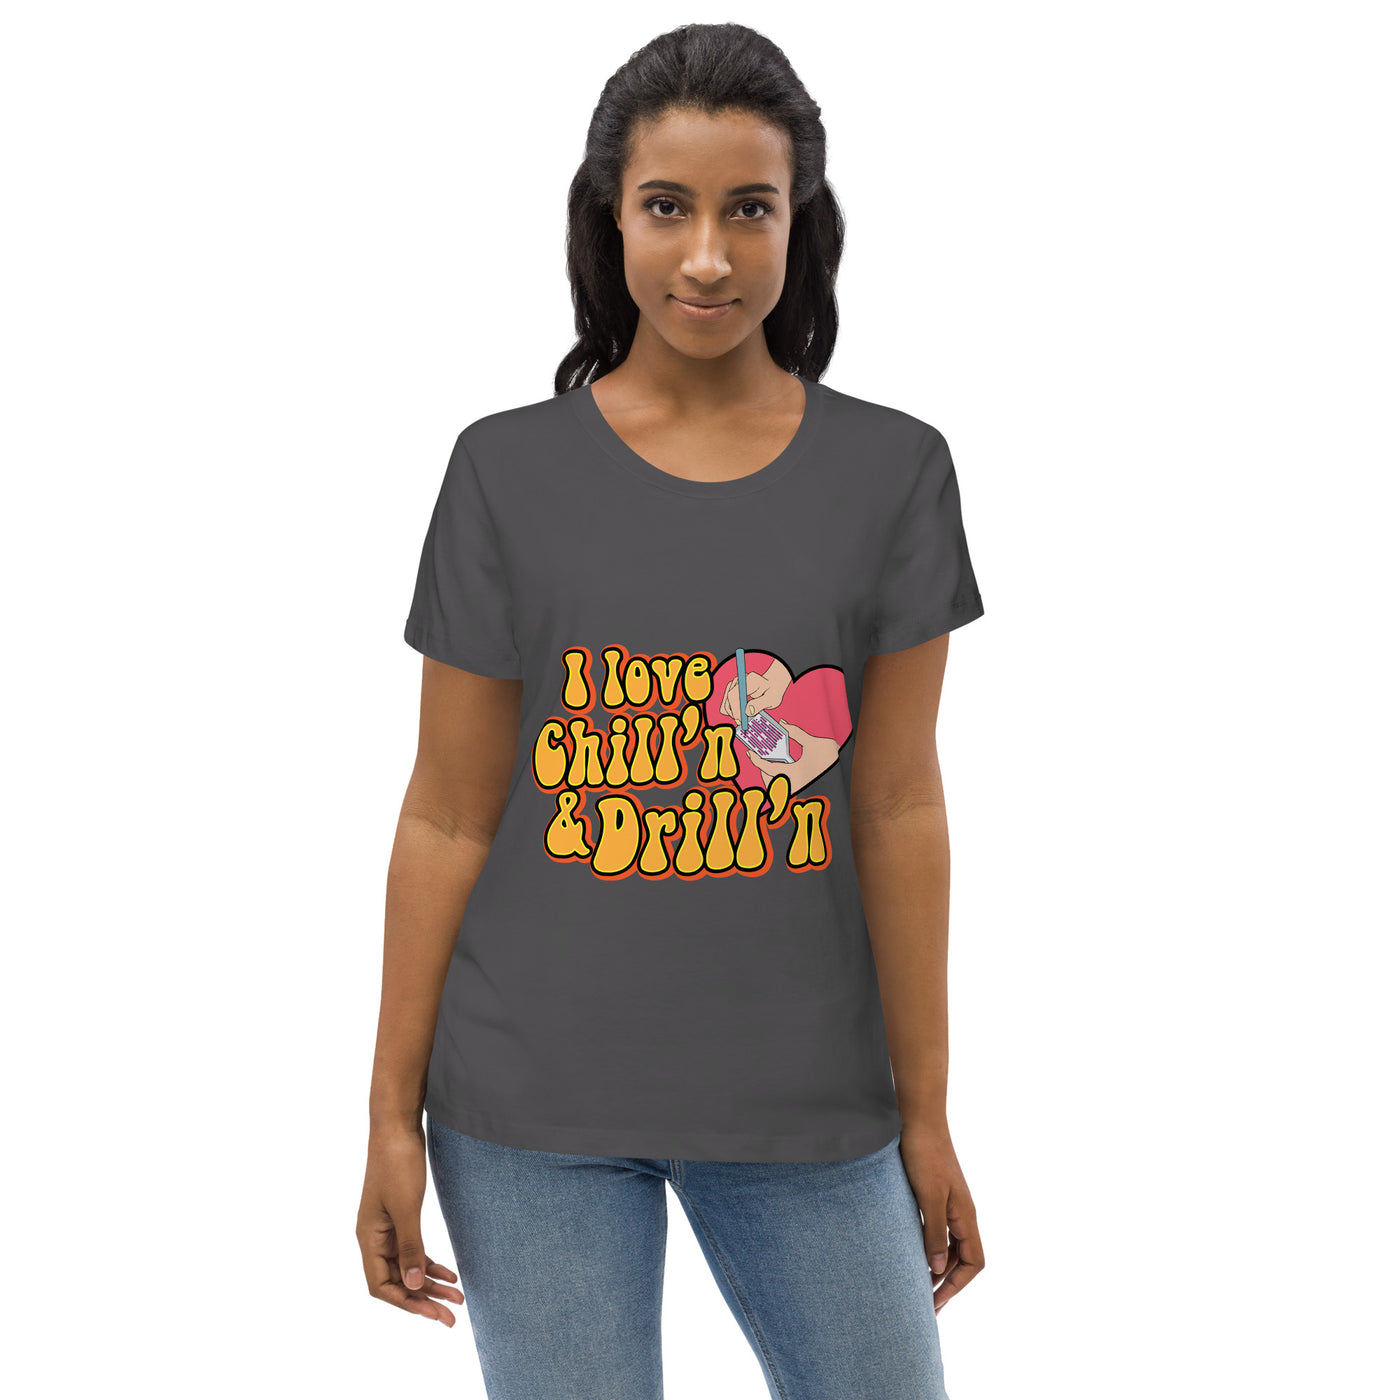 I love Chill'n & Drill'n Women's fitted eco tee